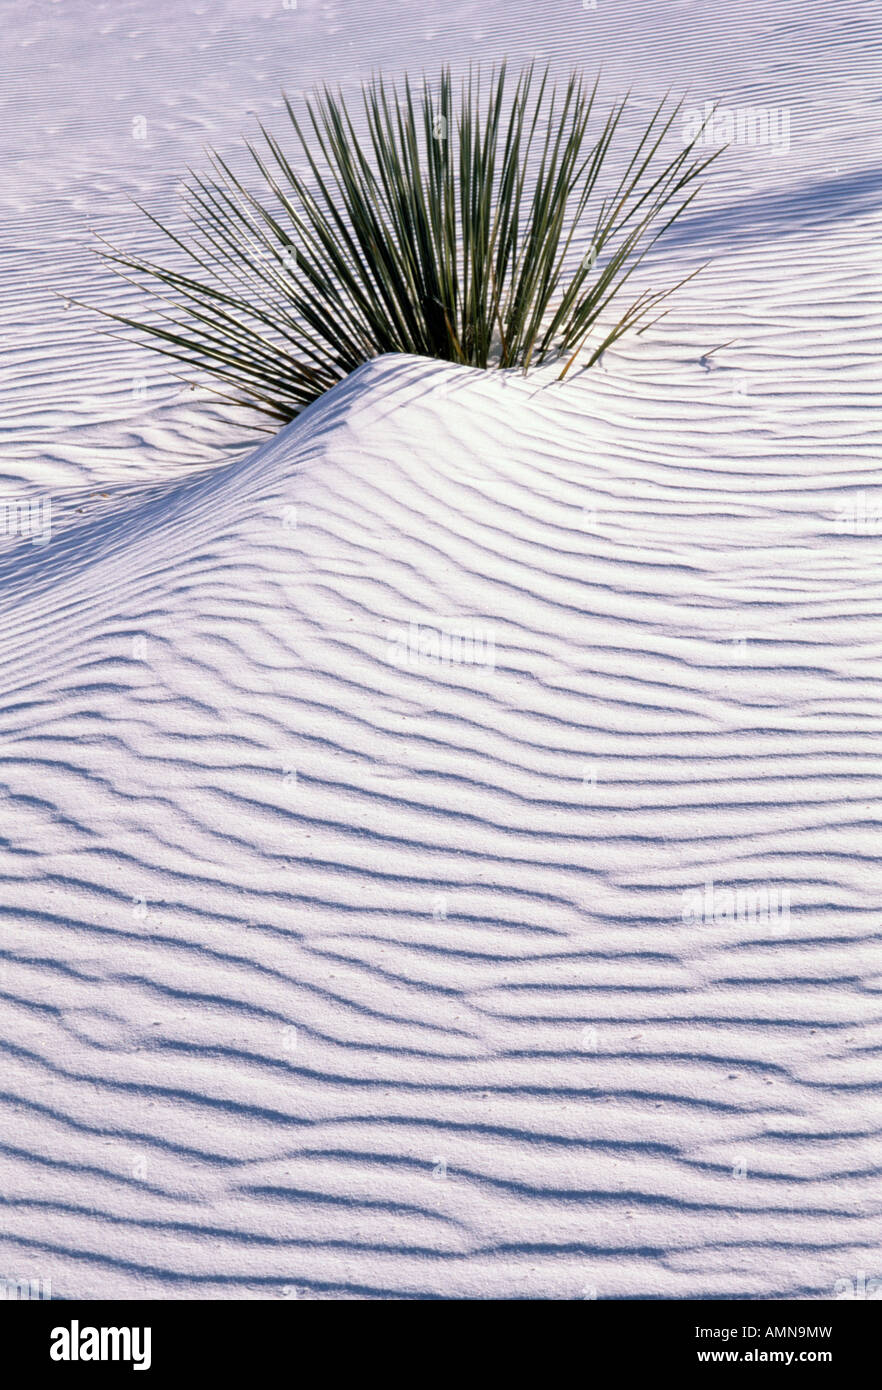 soaptree yucca (Yucca elata) in gypsum sand dune, White Sands National Monument, New Mexico USA Stock Photo